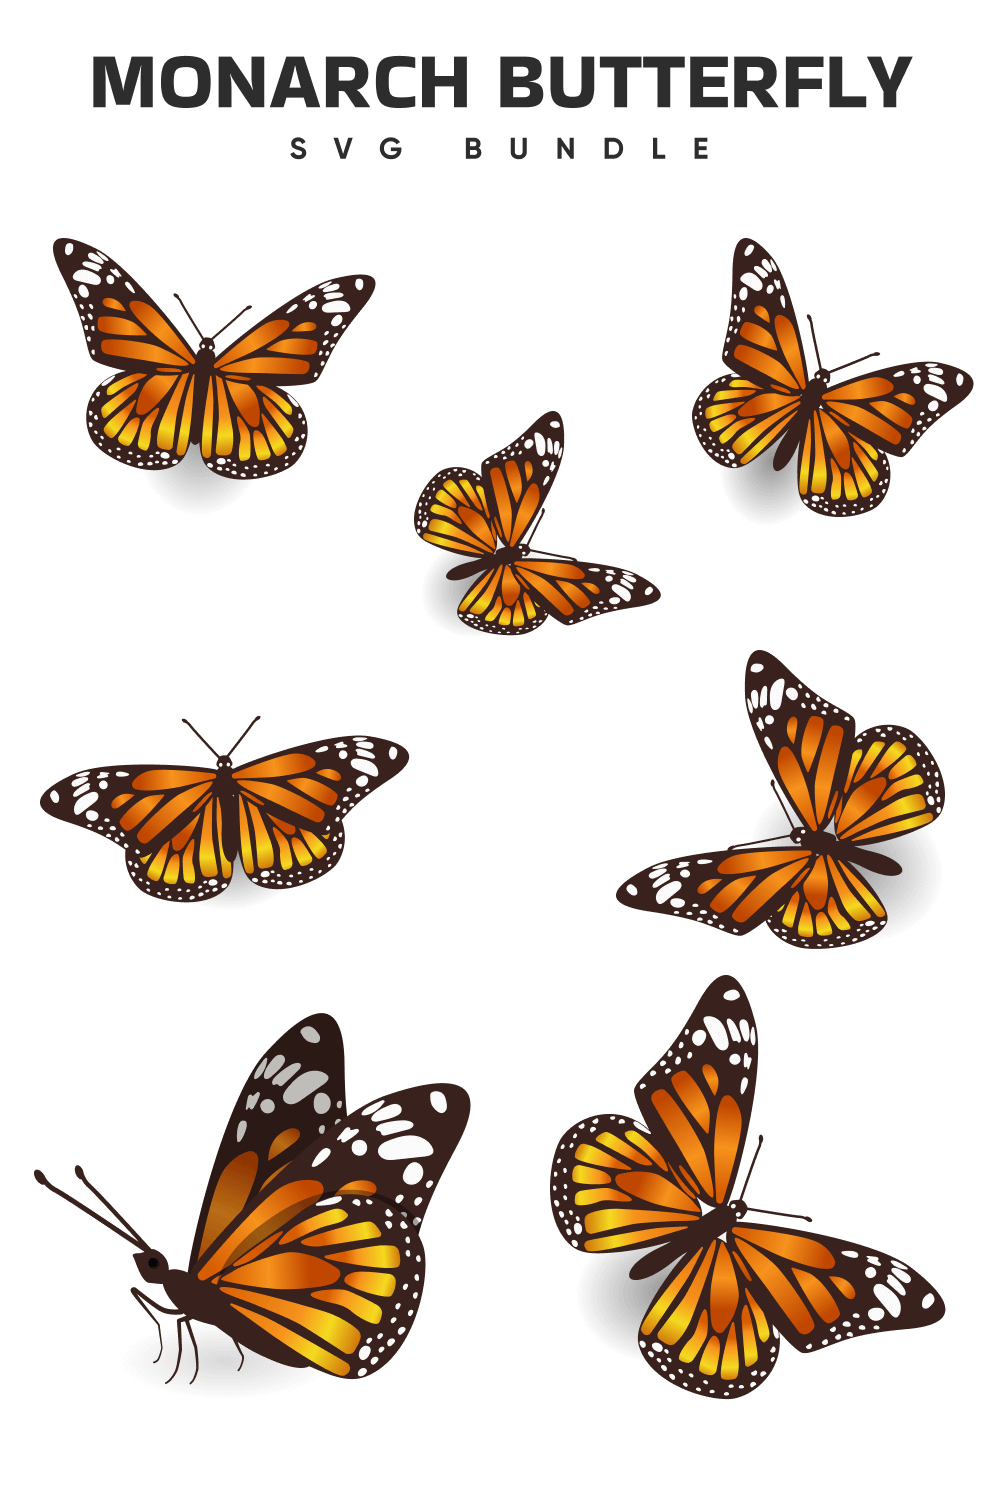 Bunch of butterflies flying in the air.